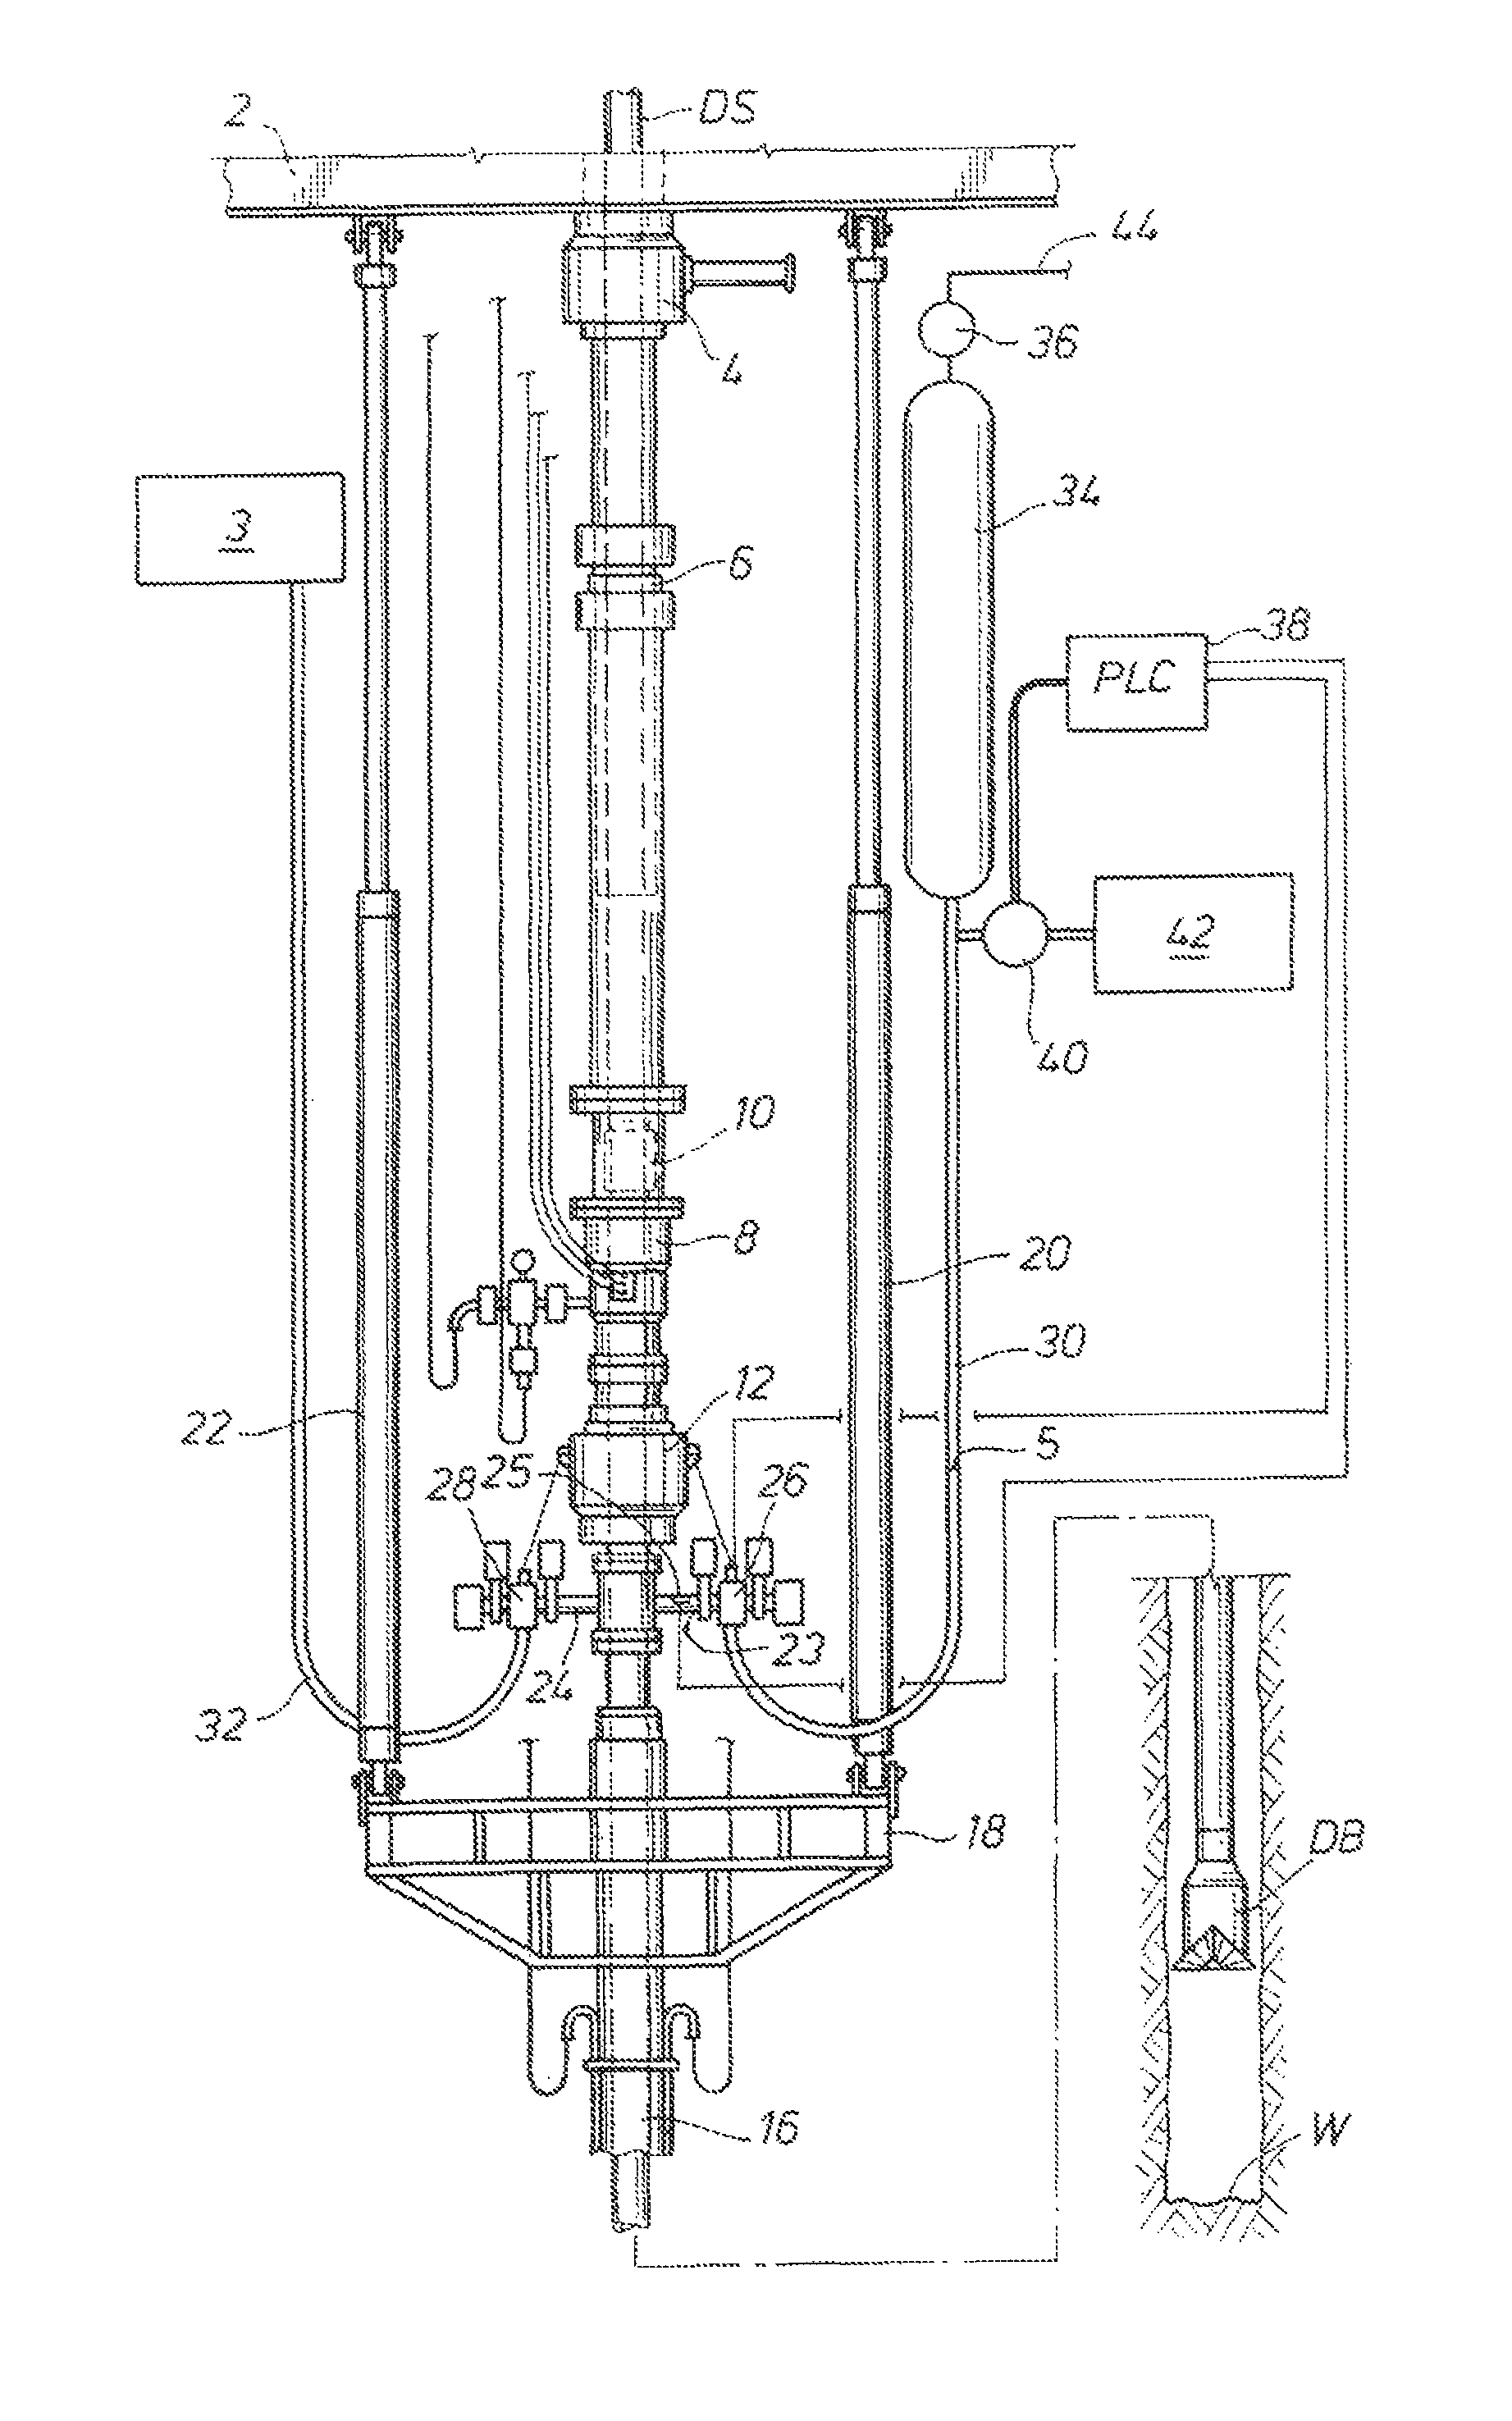 System and method for managing heave pressure from a floating rig